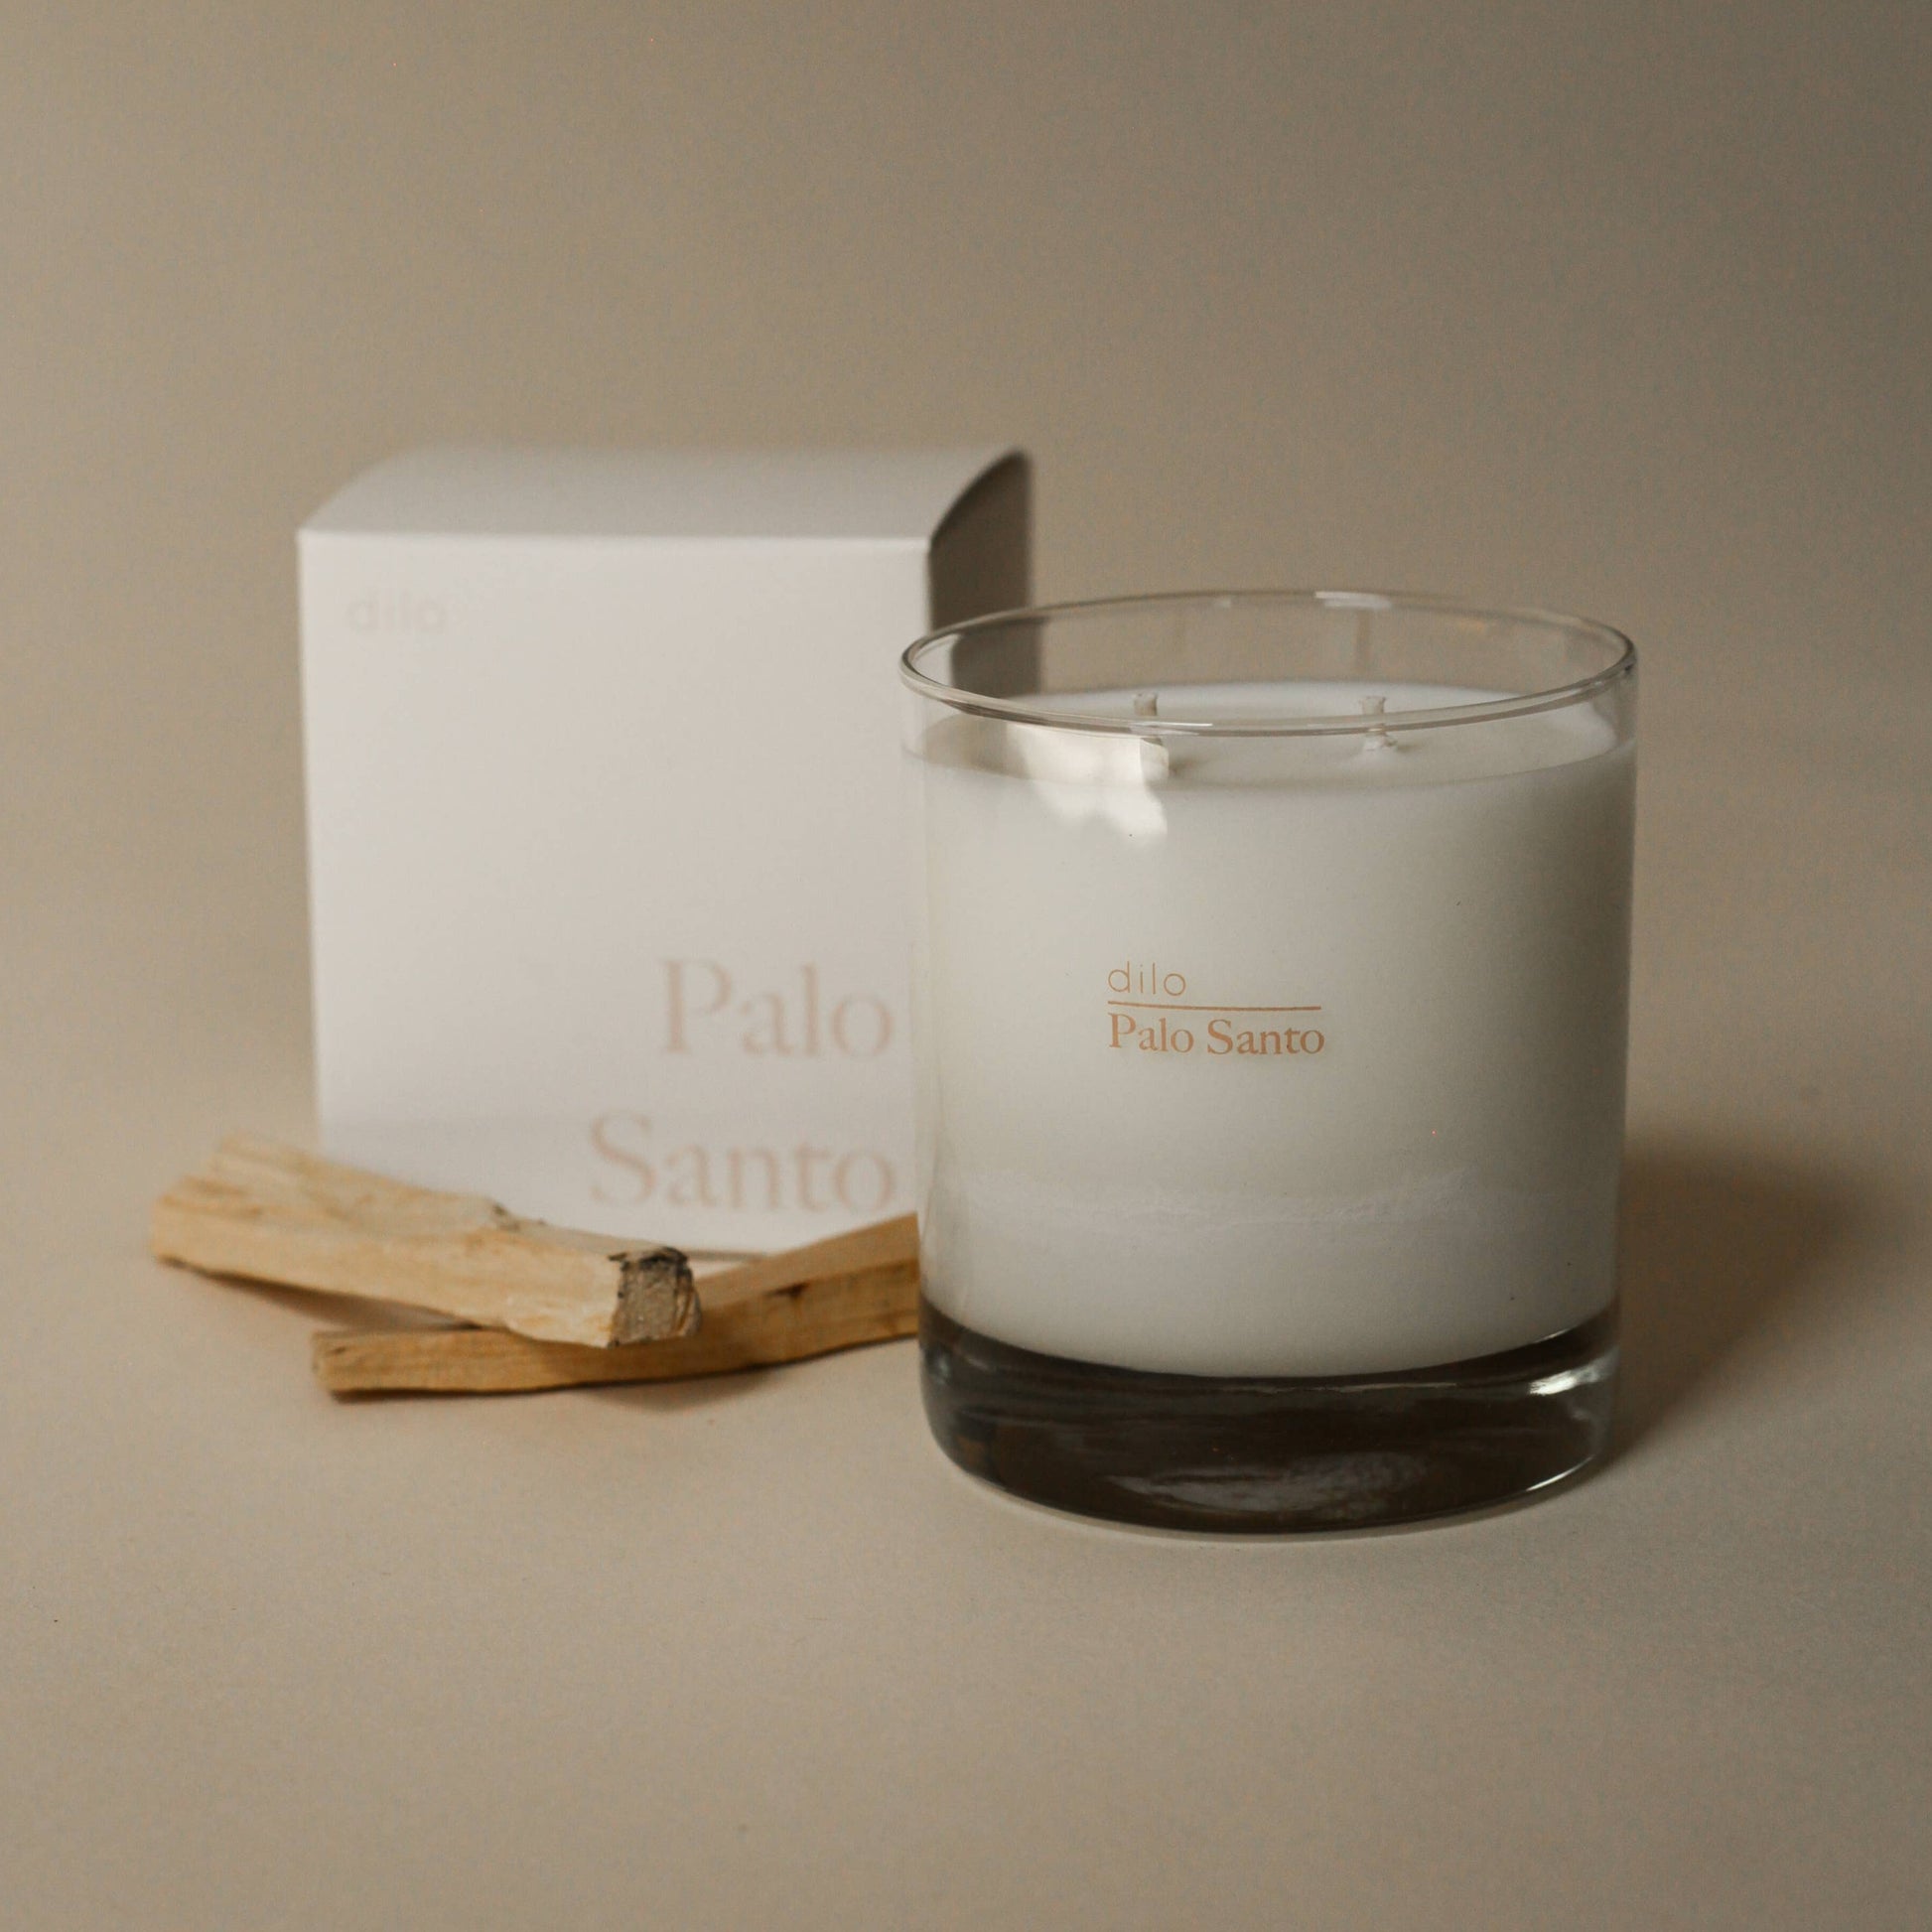 PALO SANTO CANDLE - The Crowd Went Wild